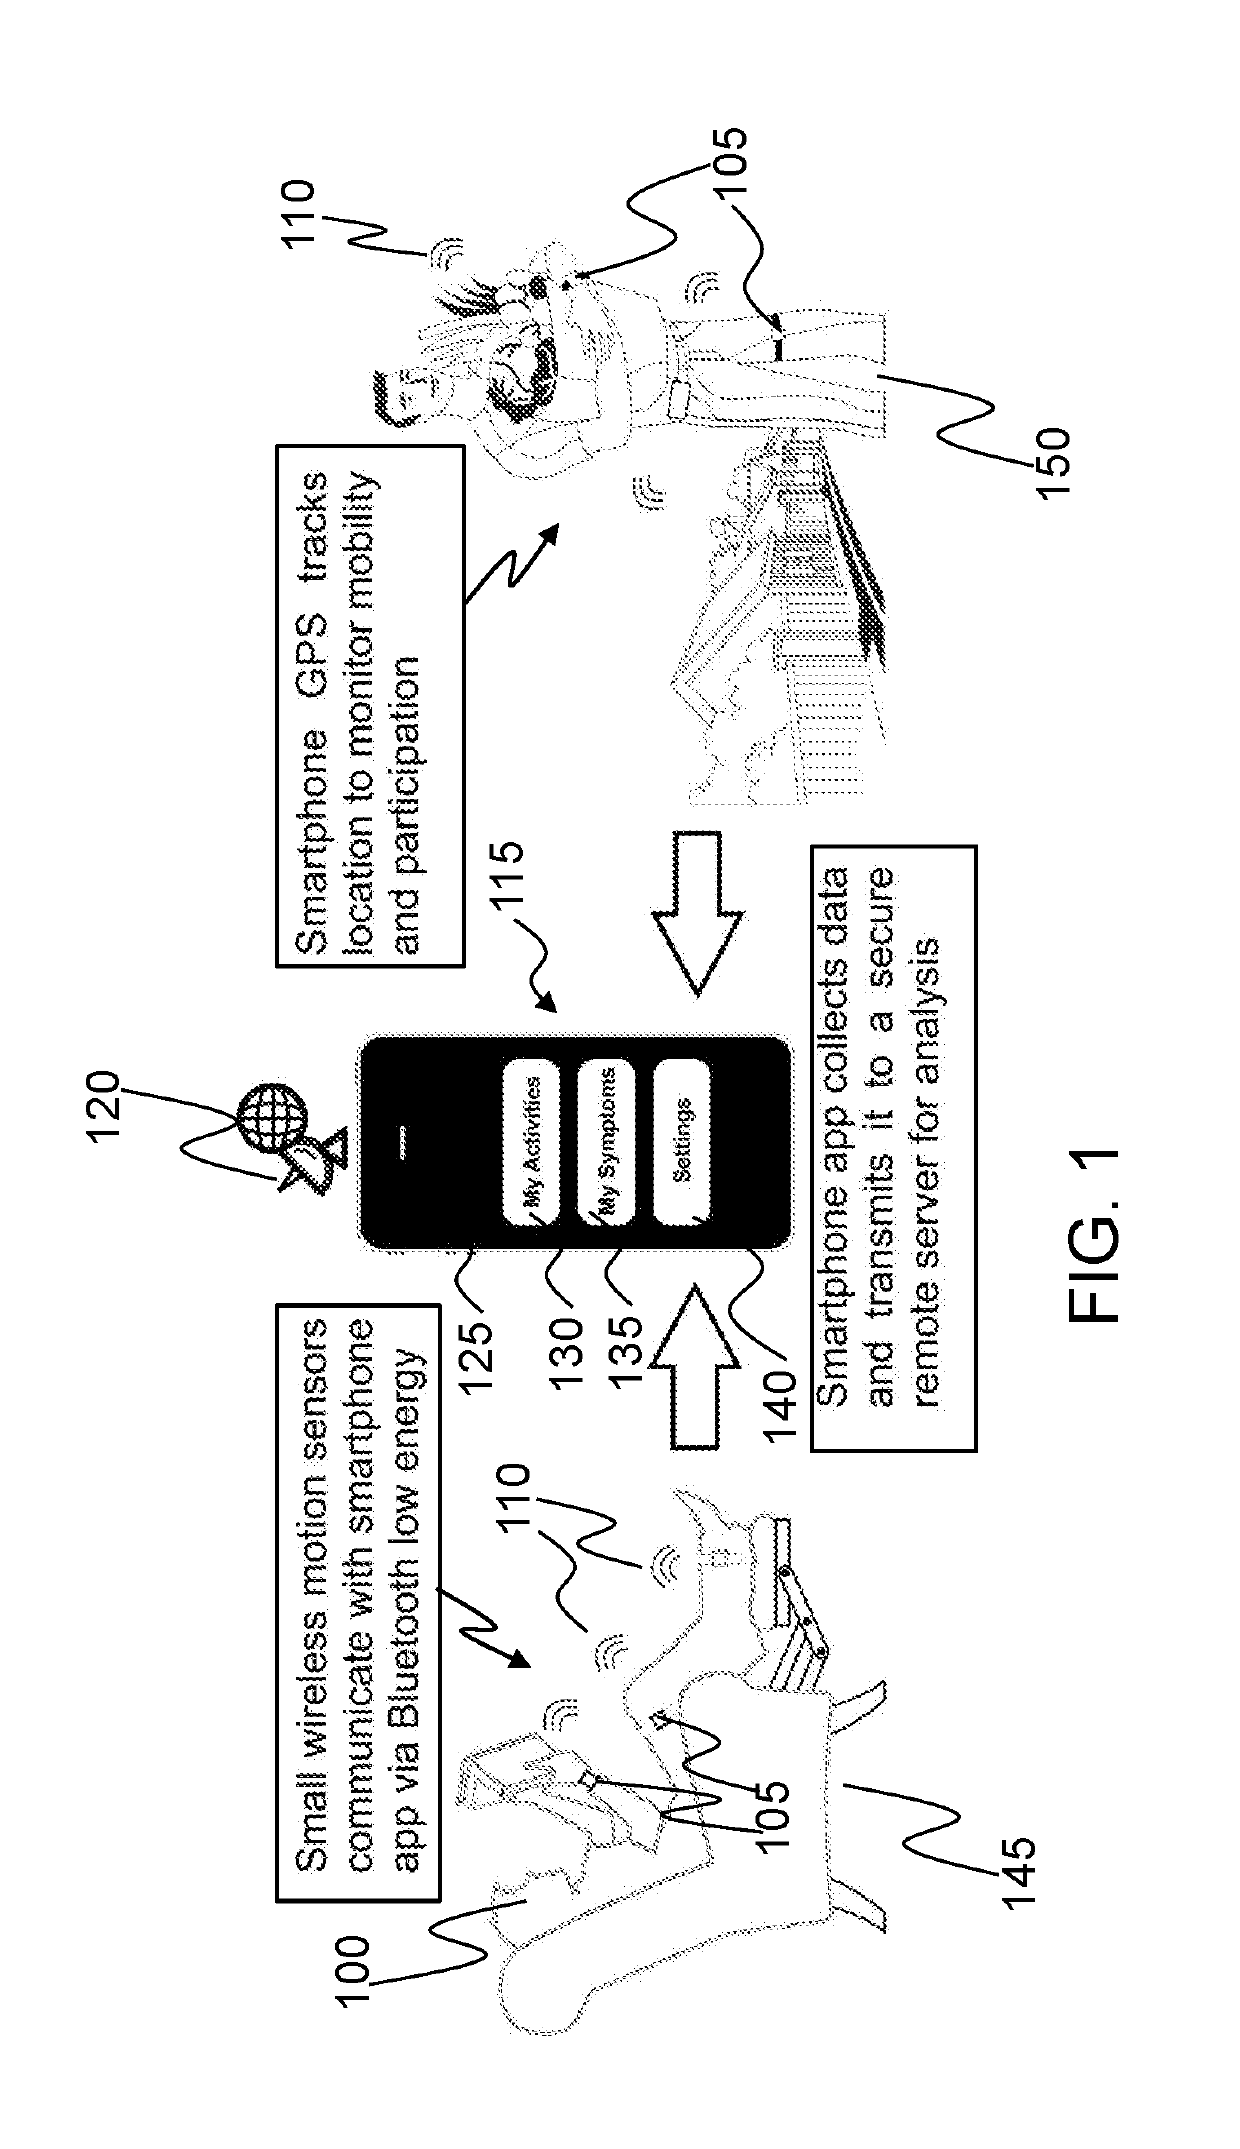 Pain quantification and management system and device, and method of using